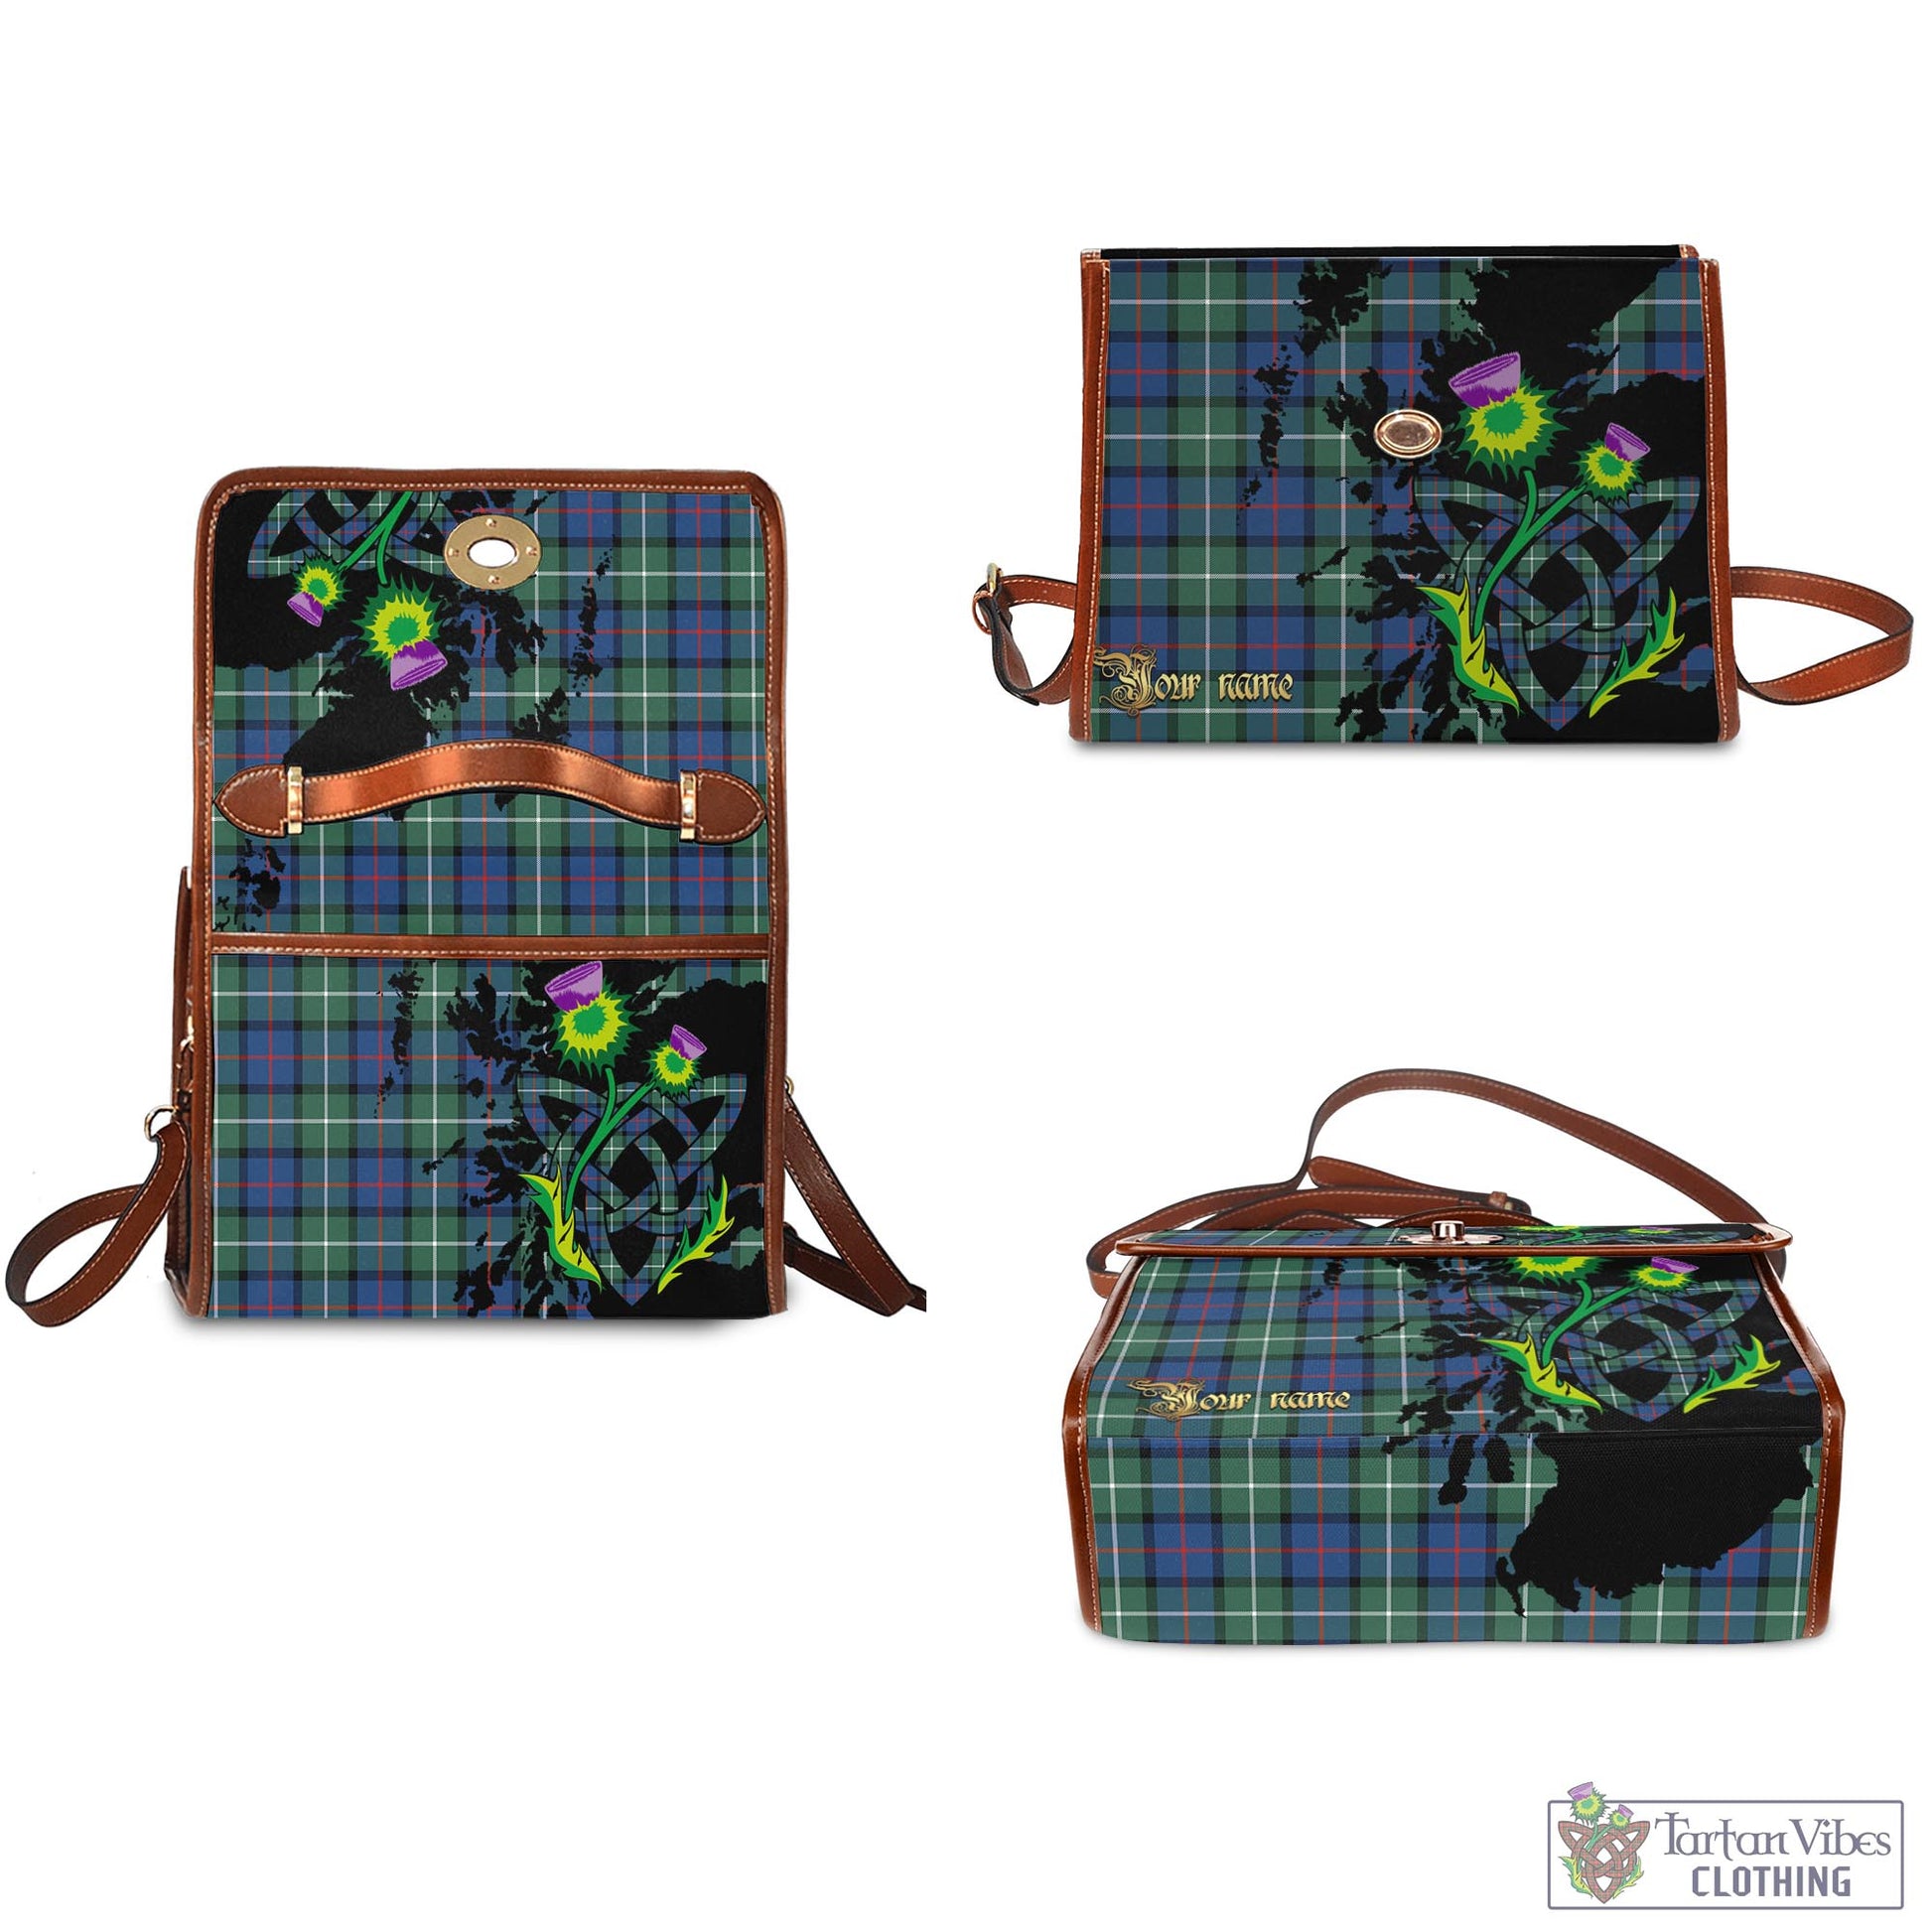 Tartan Vibes Clothing Davidson of Tulloch Tartan Waterproof Canvas Bag with Scotland Map and Thistle Celtic Accents